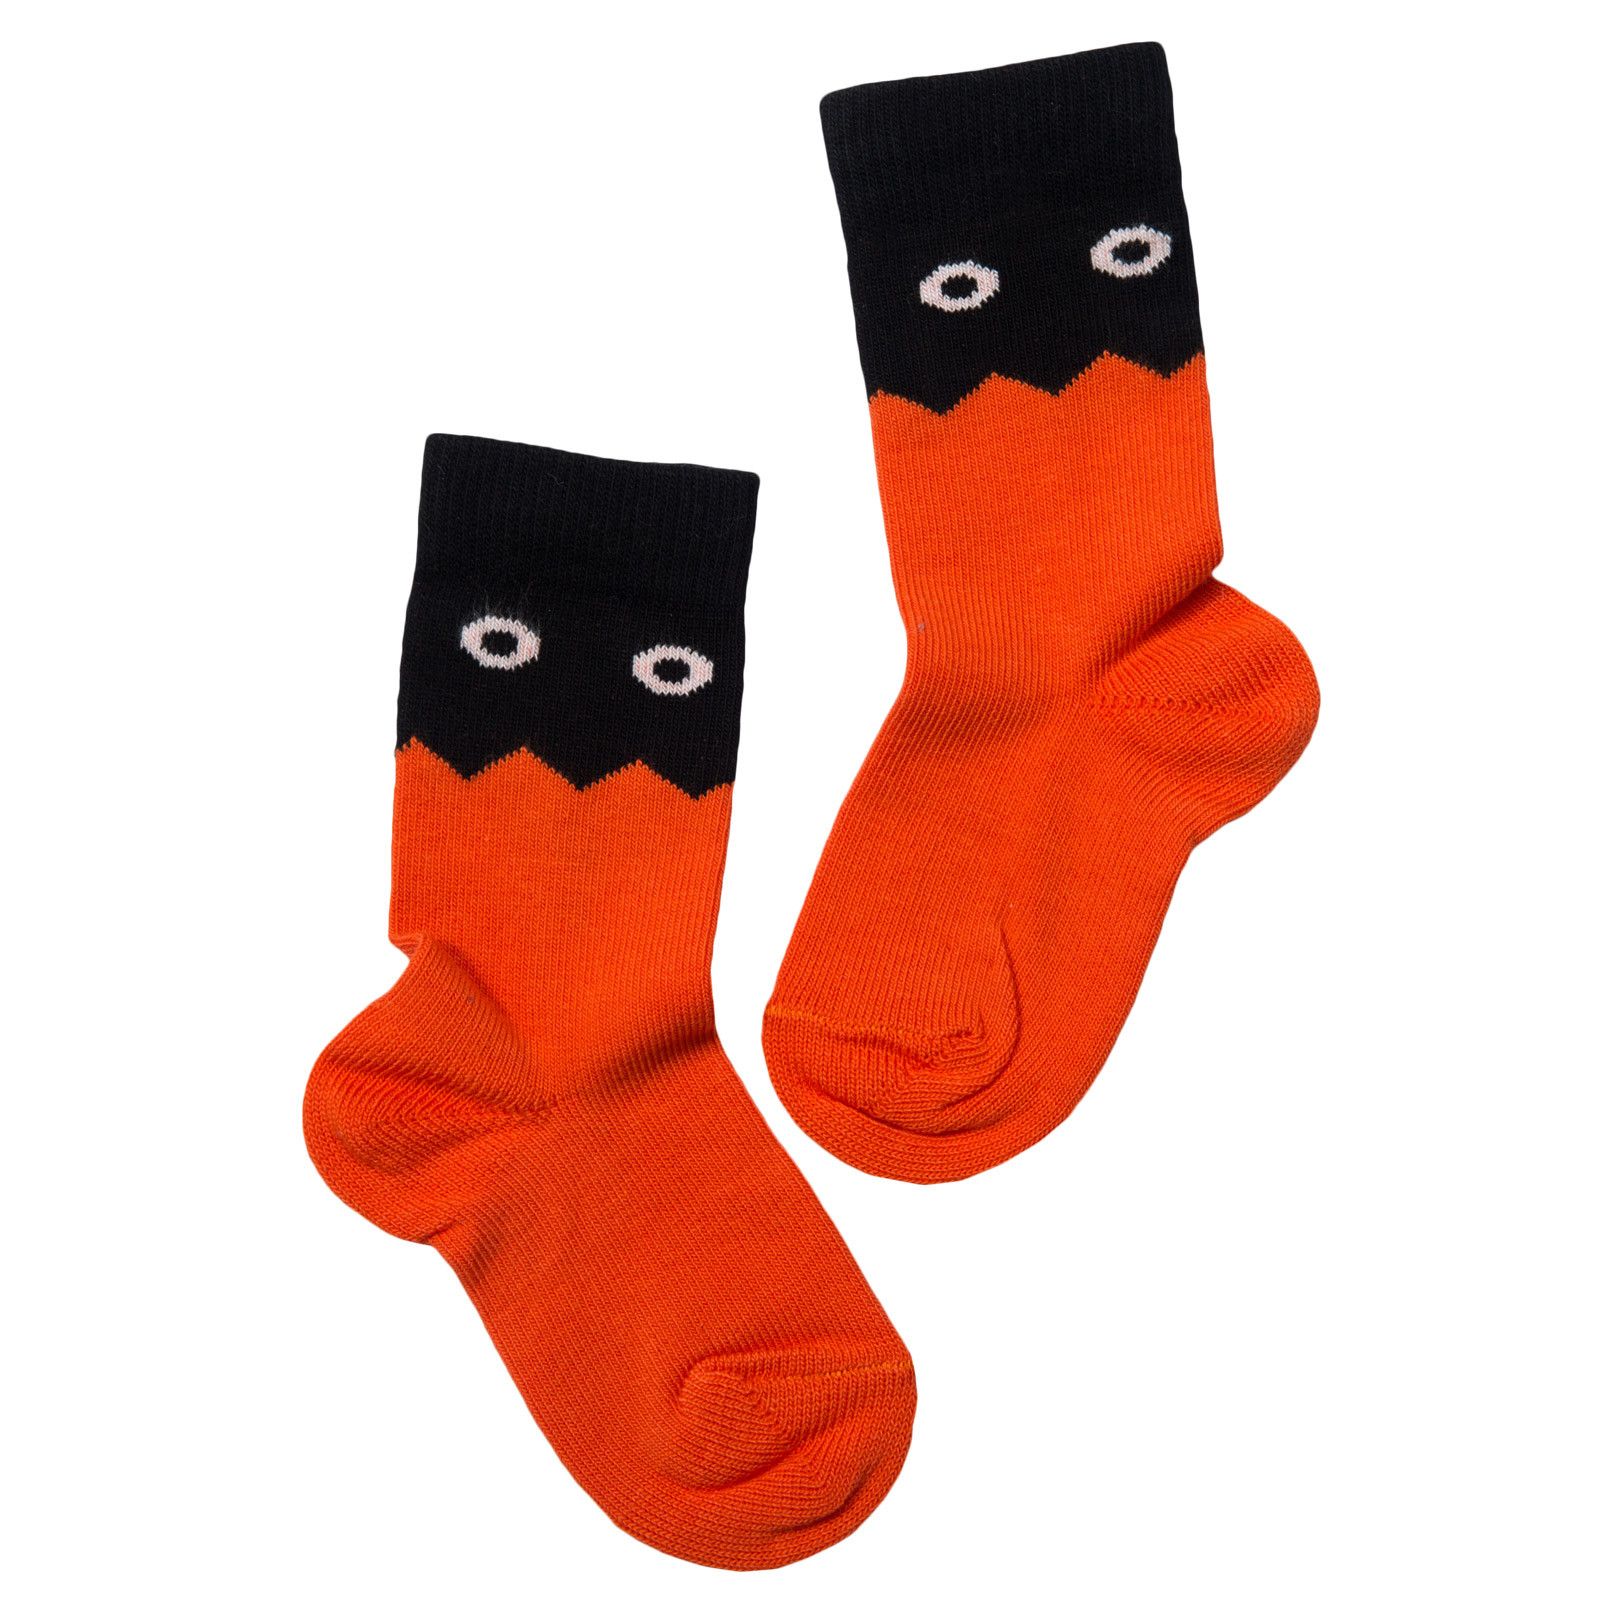 Boys Red Embroidered Monster Two-tone Socks - CÉMAROSE | Children's Fashion Store - 1